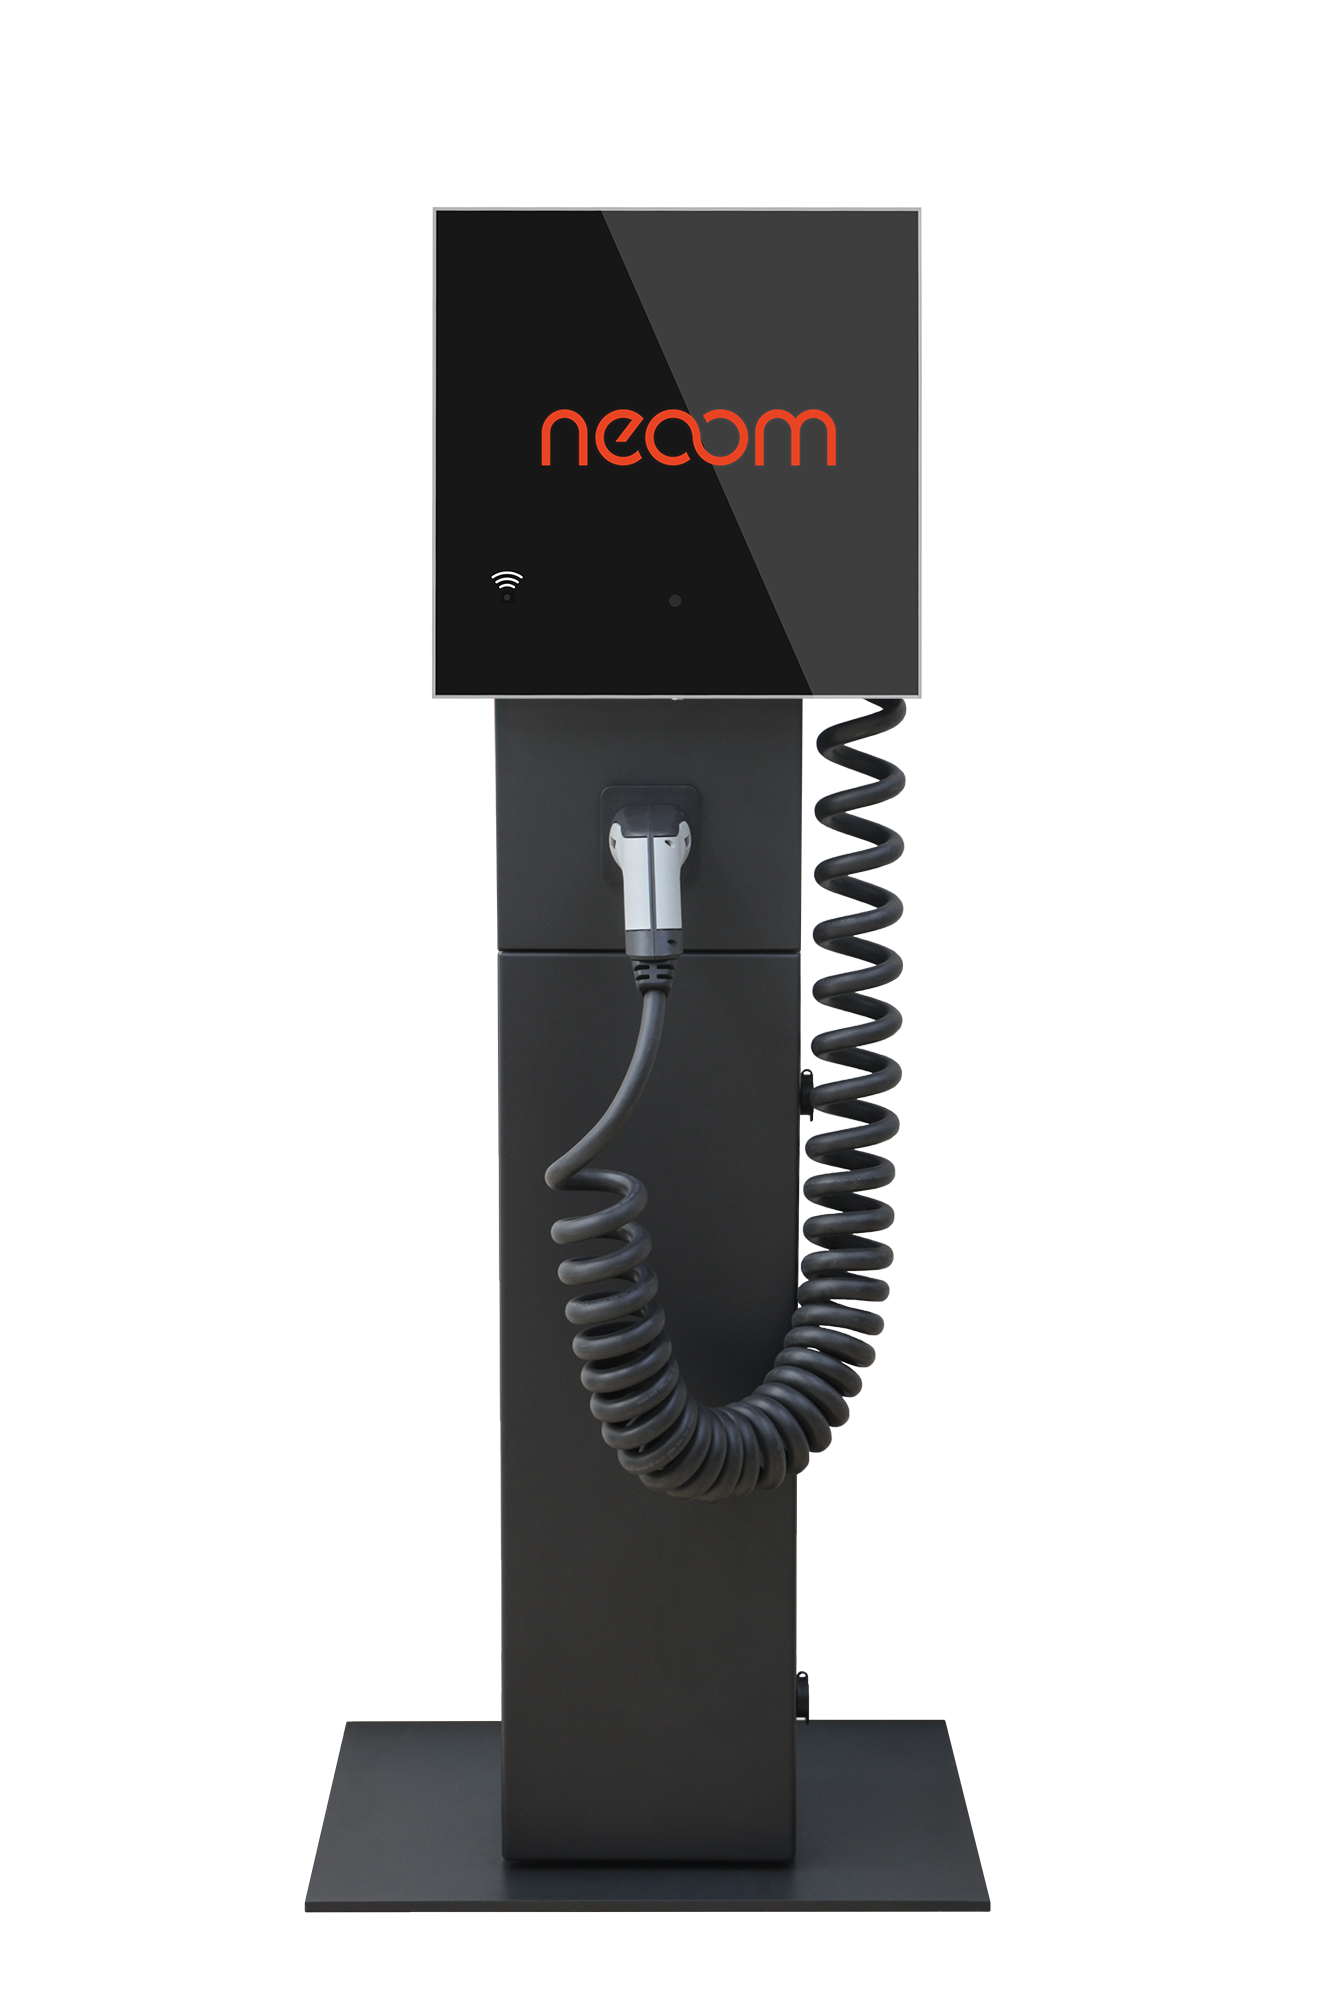 The neoom BOXX is the smart wallbox with dynamic load control